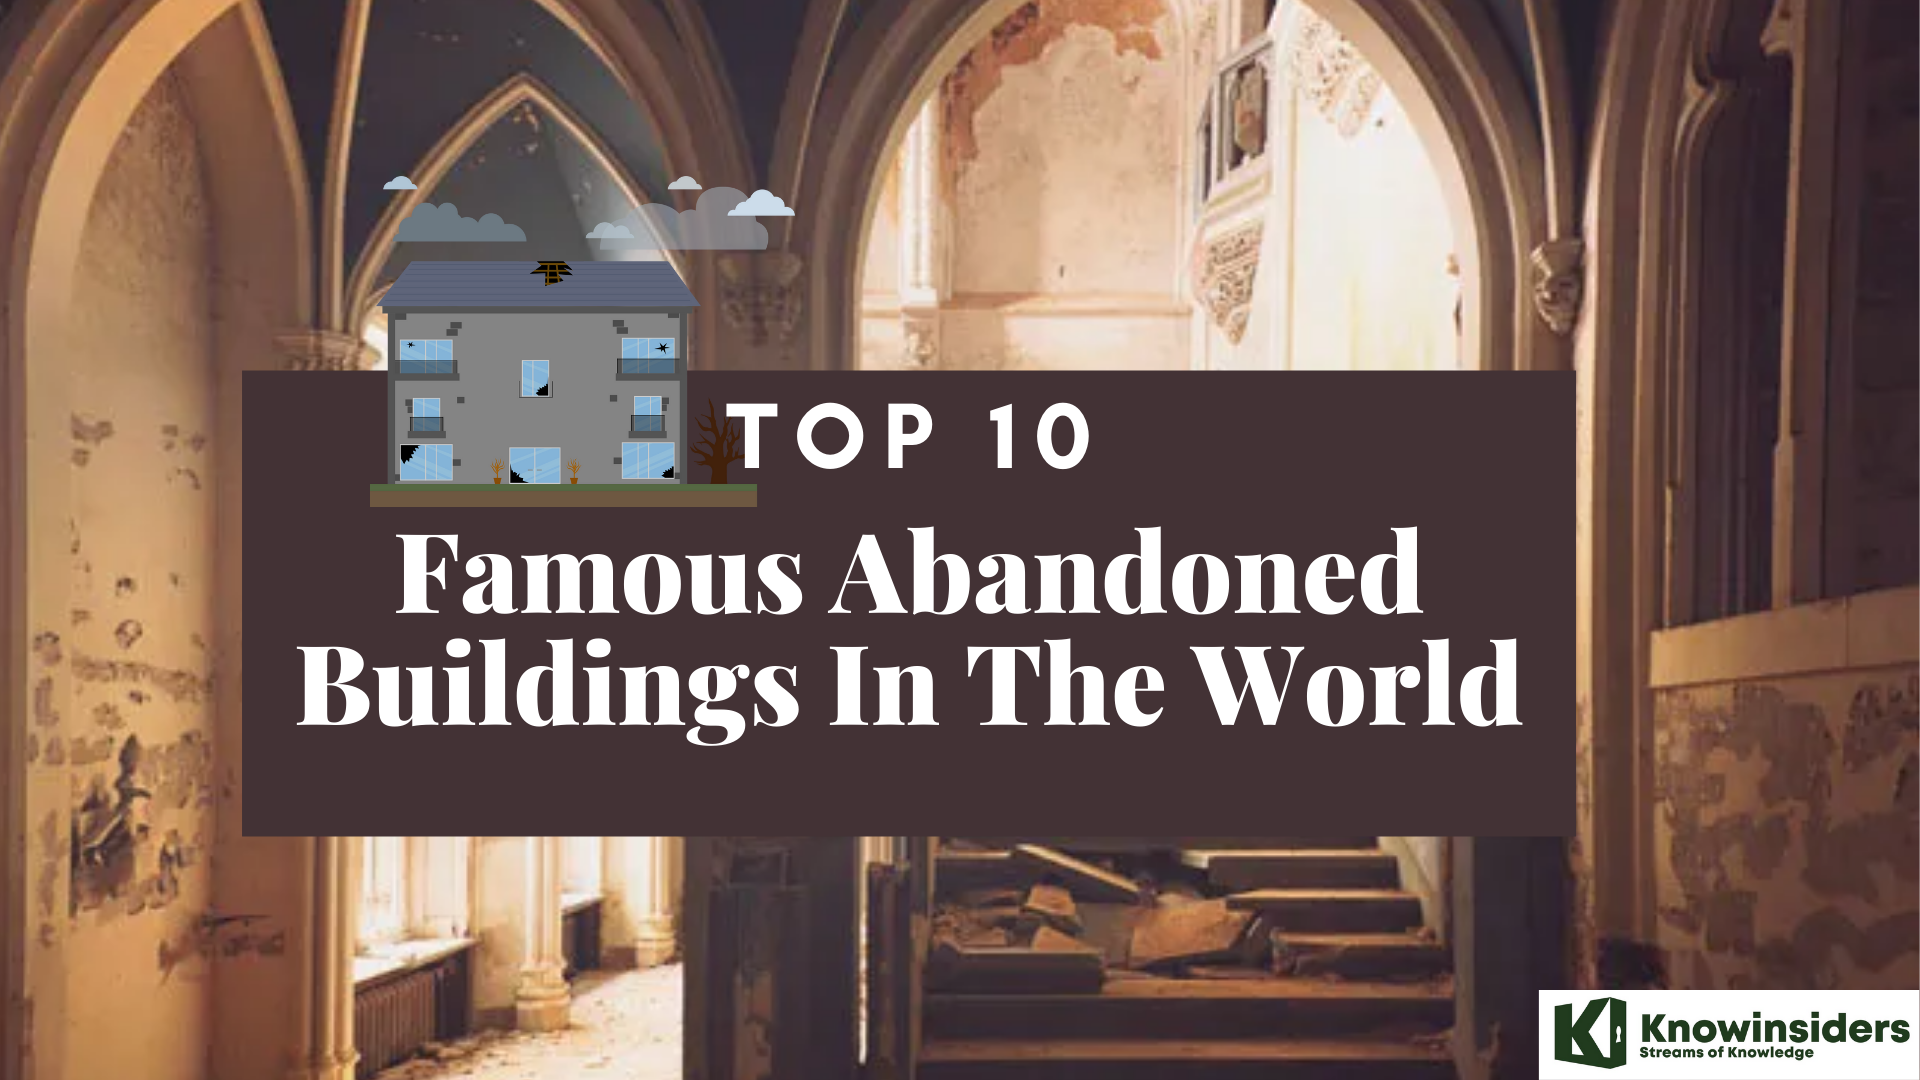 Top 10 Glorious Abandoned Buildings In The World